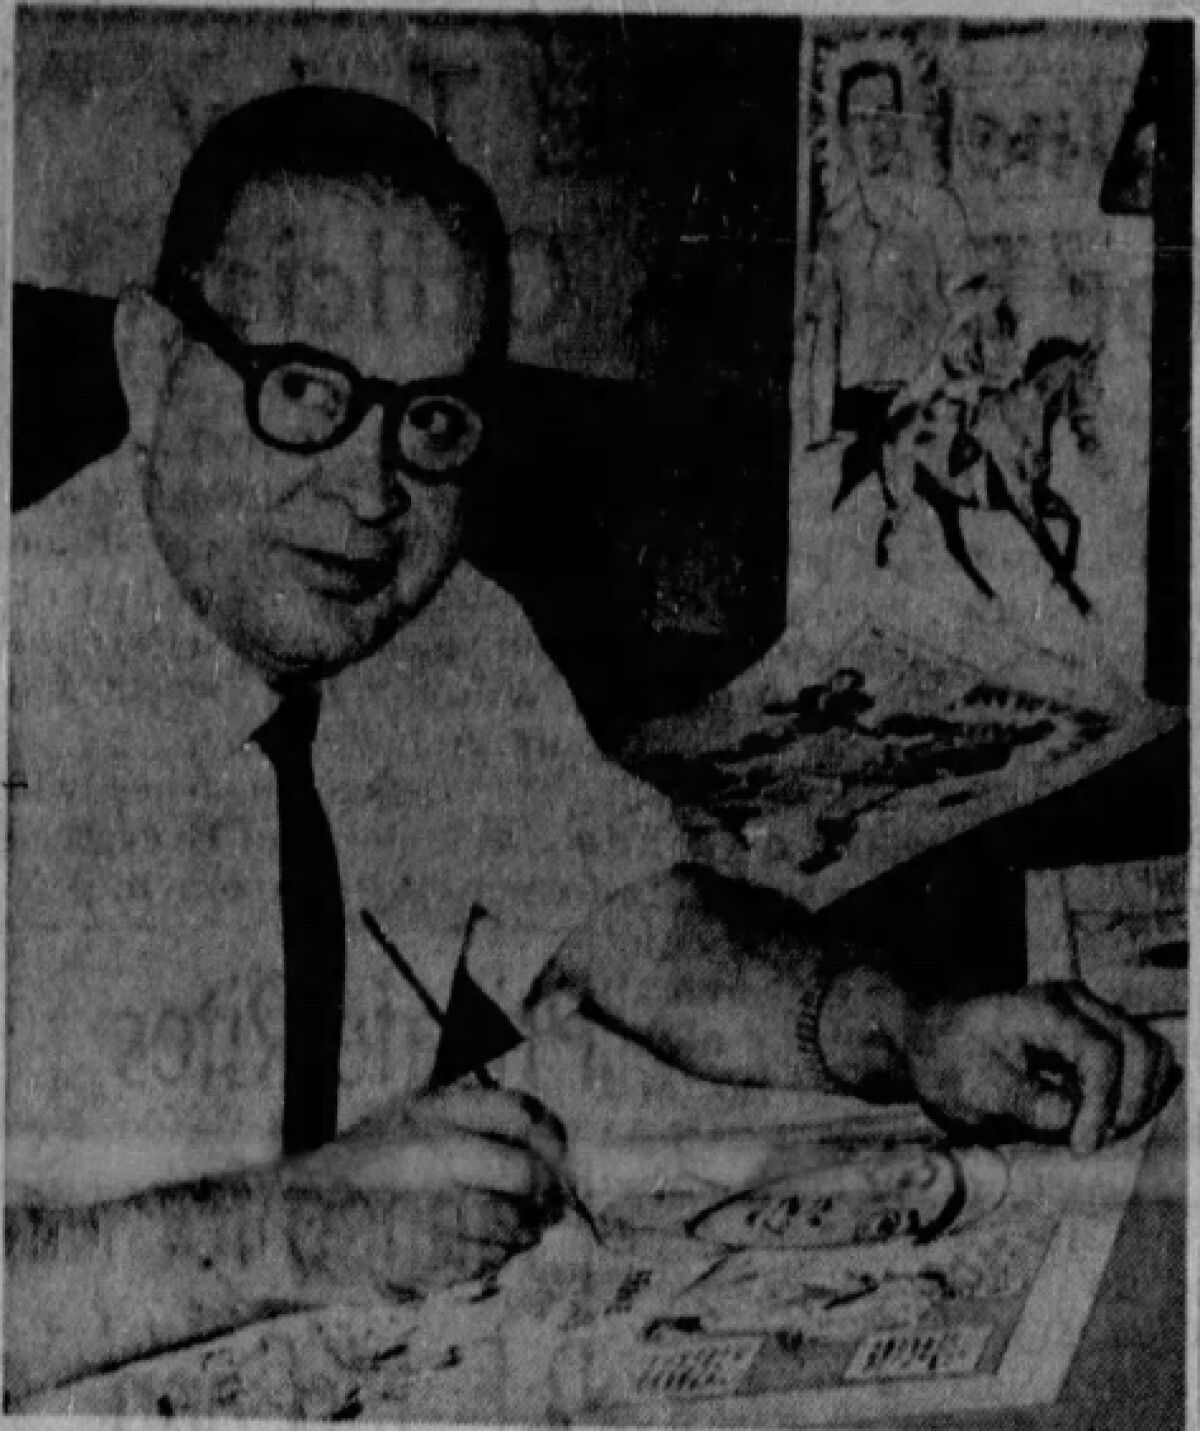 Alex Perez, L.A. Times cartoonist, with a pencil in hand at his desk